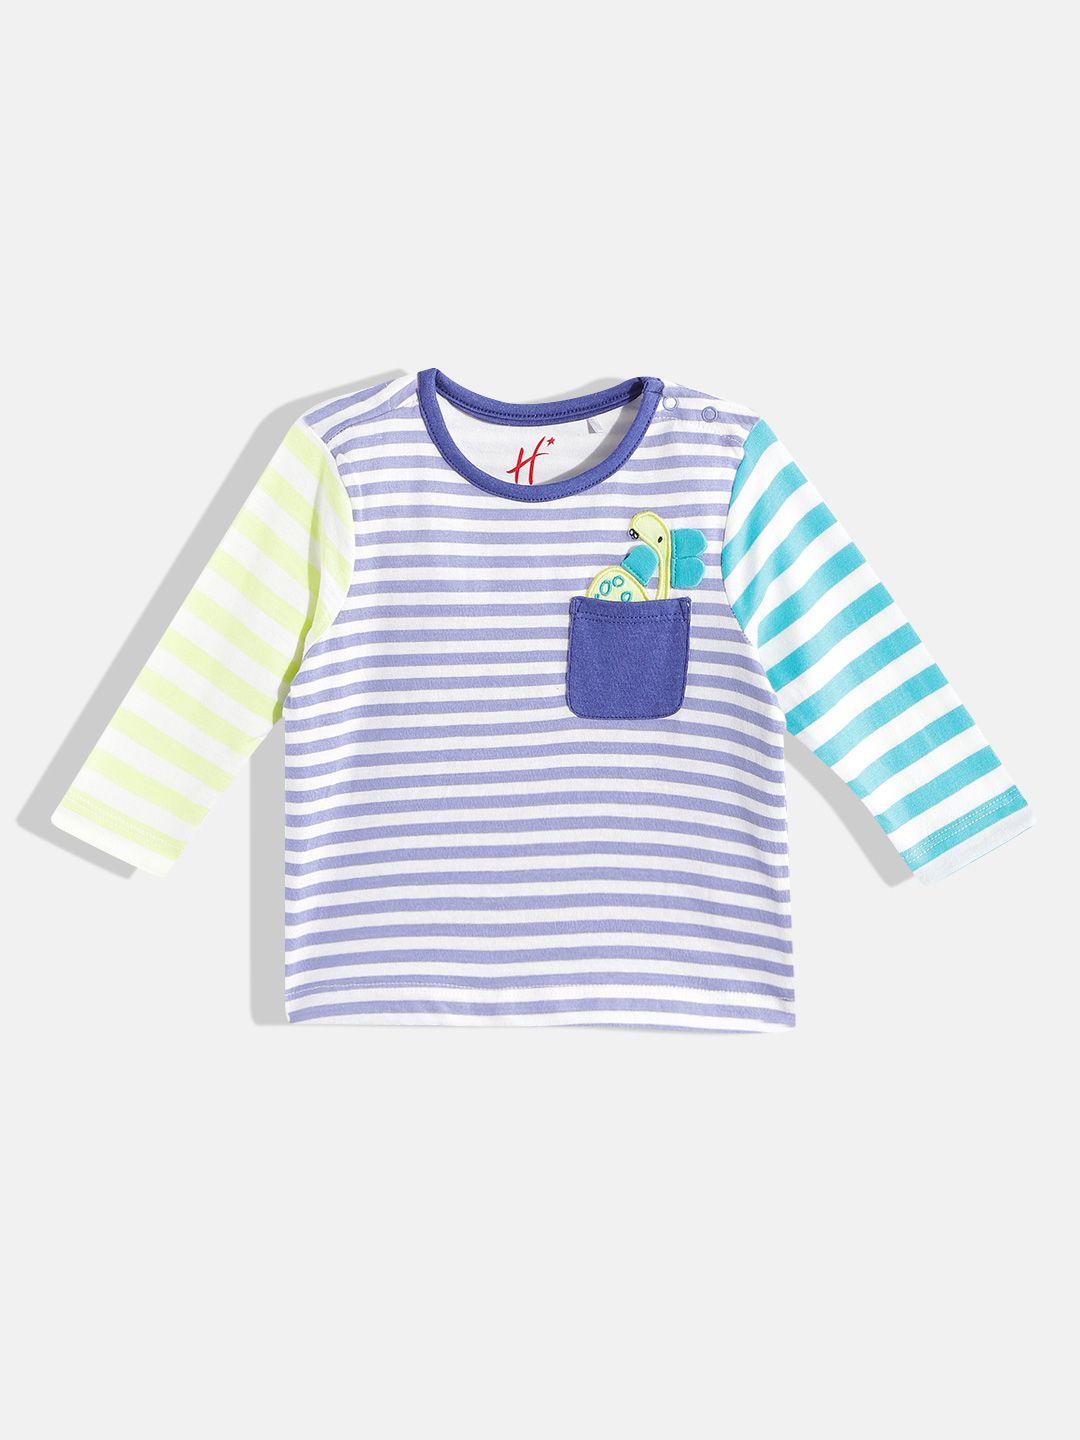 h by hamleys infant boys white & blue striped pure cotton t-shirt